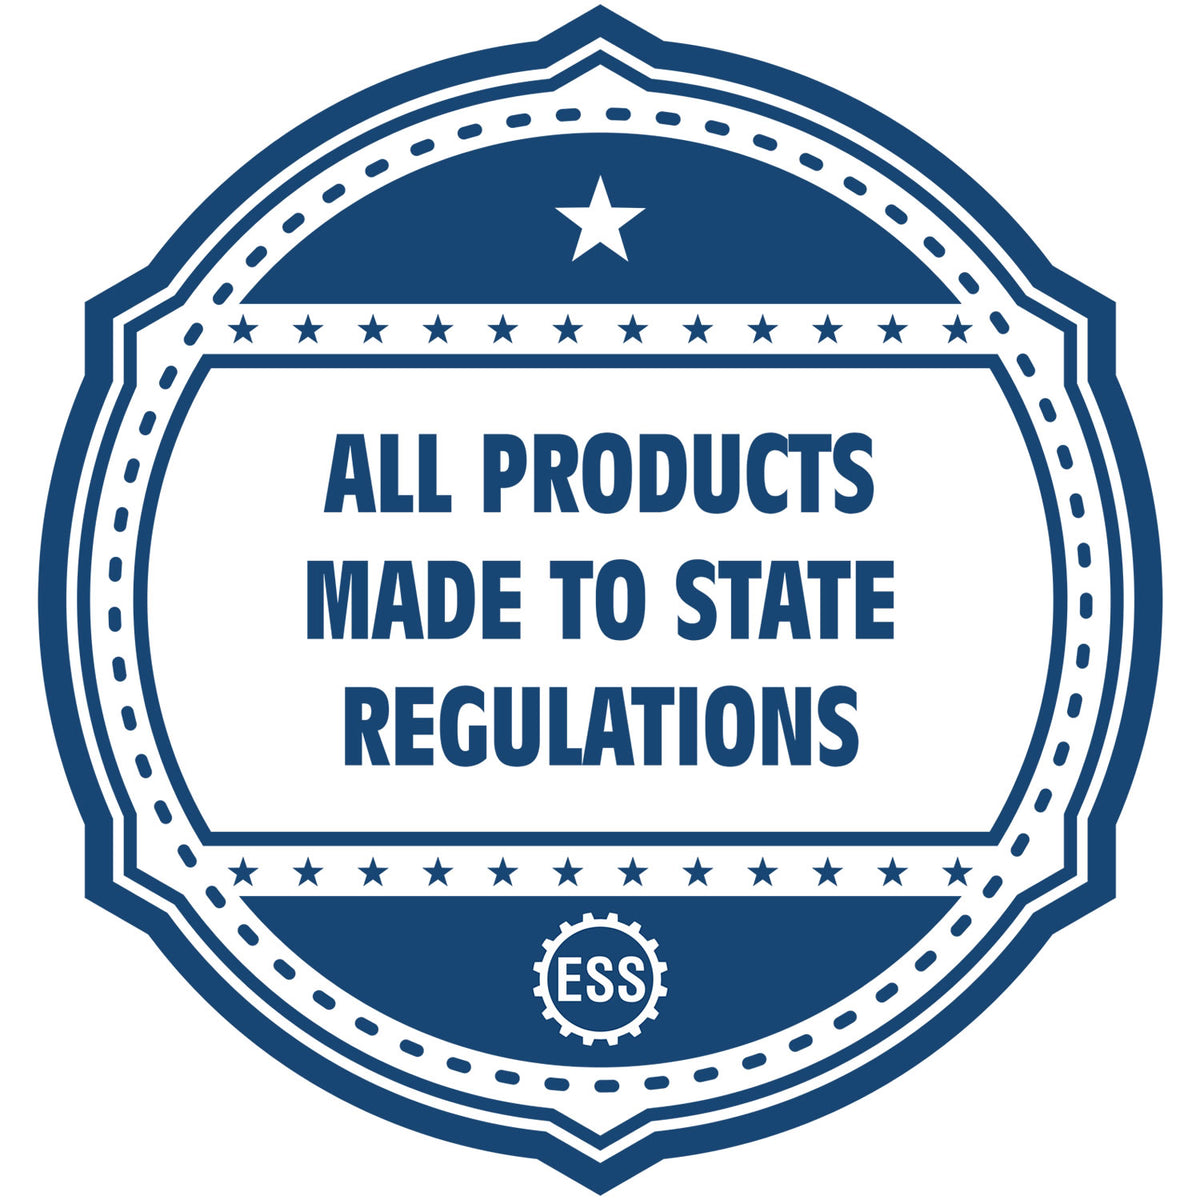 A blue icon or badge for the Hybrid Missouri Landscape Architect Seal showing that this product is made in compliance with state regulations.